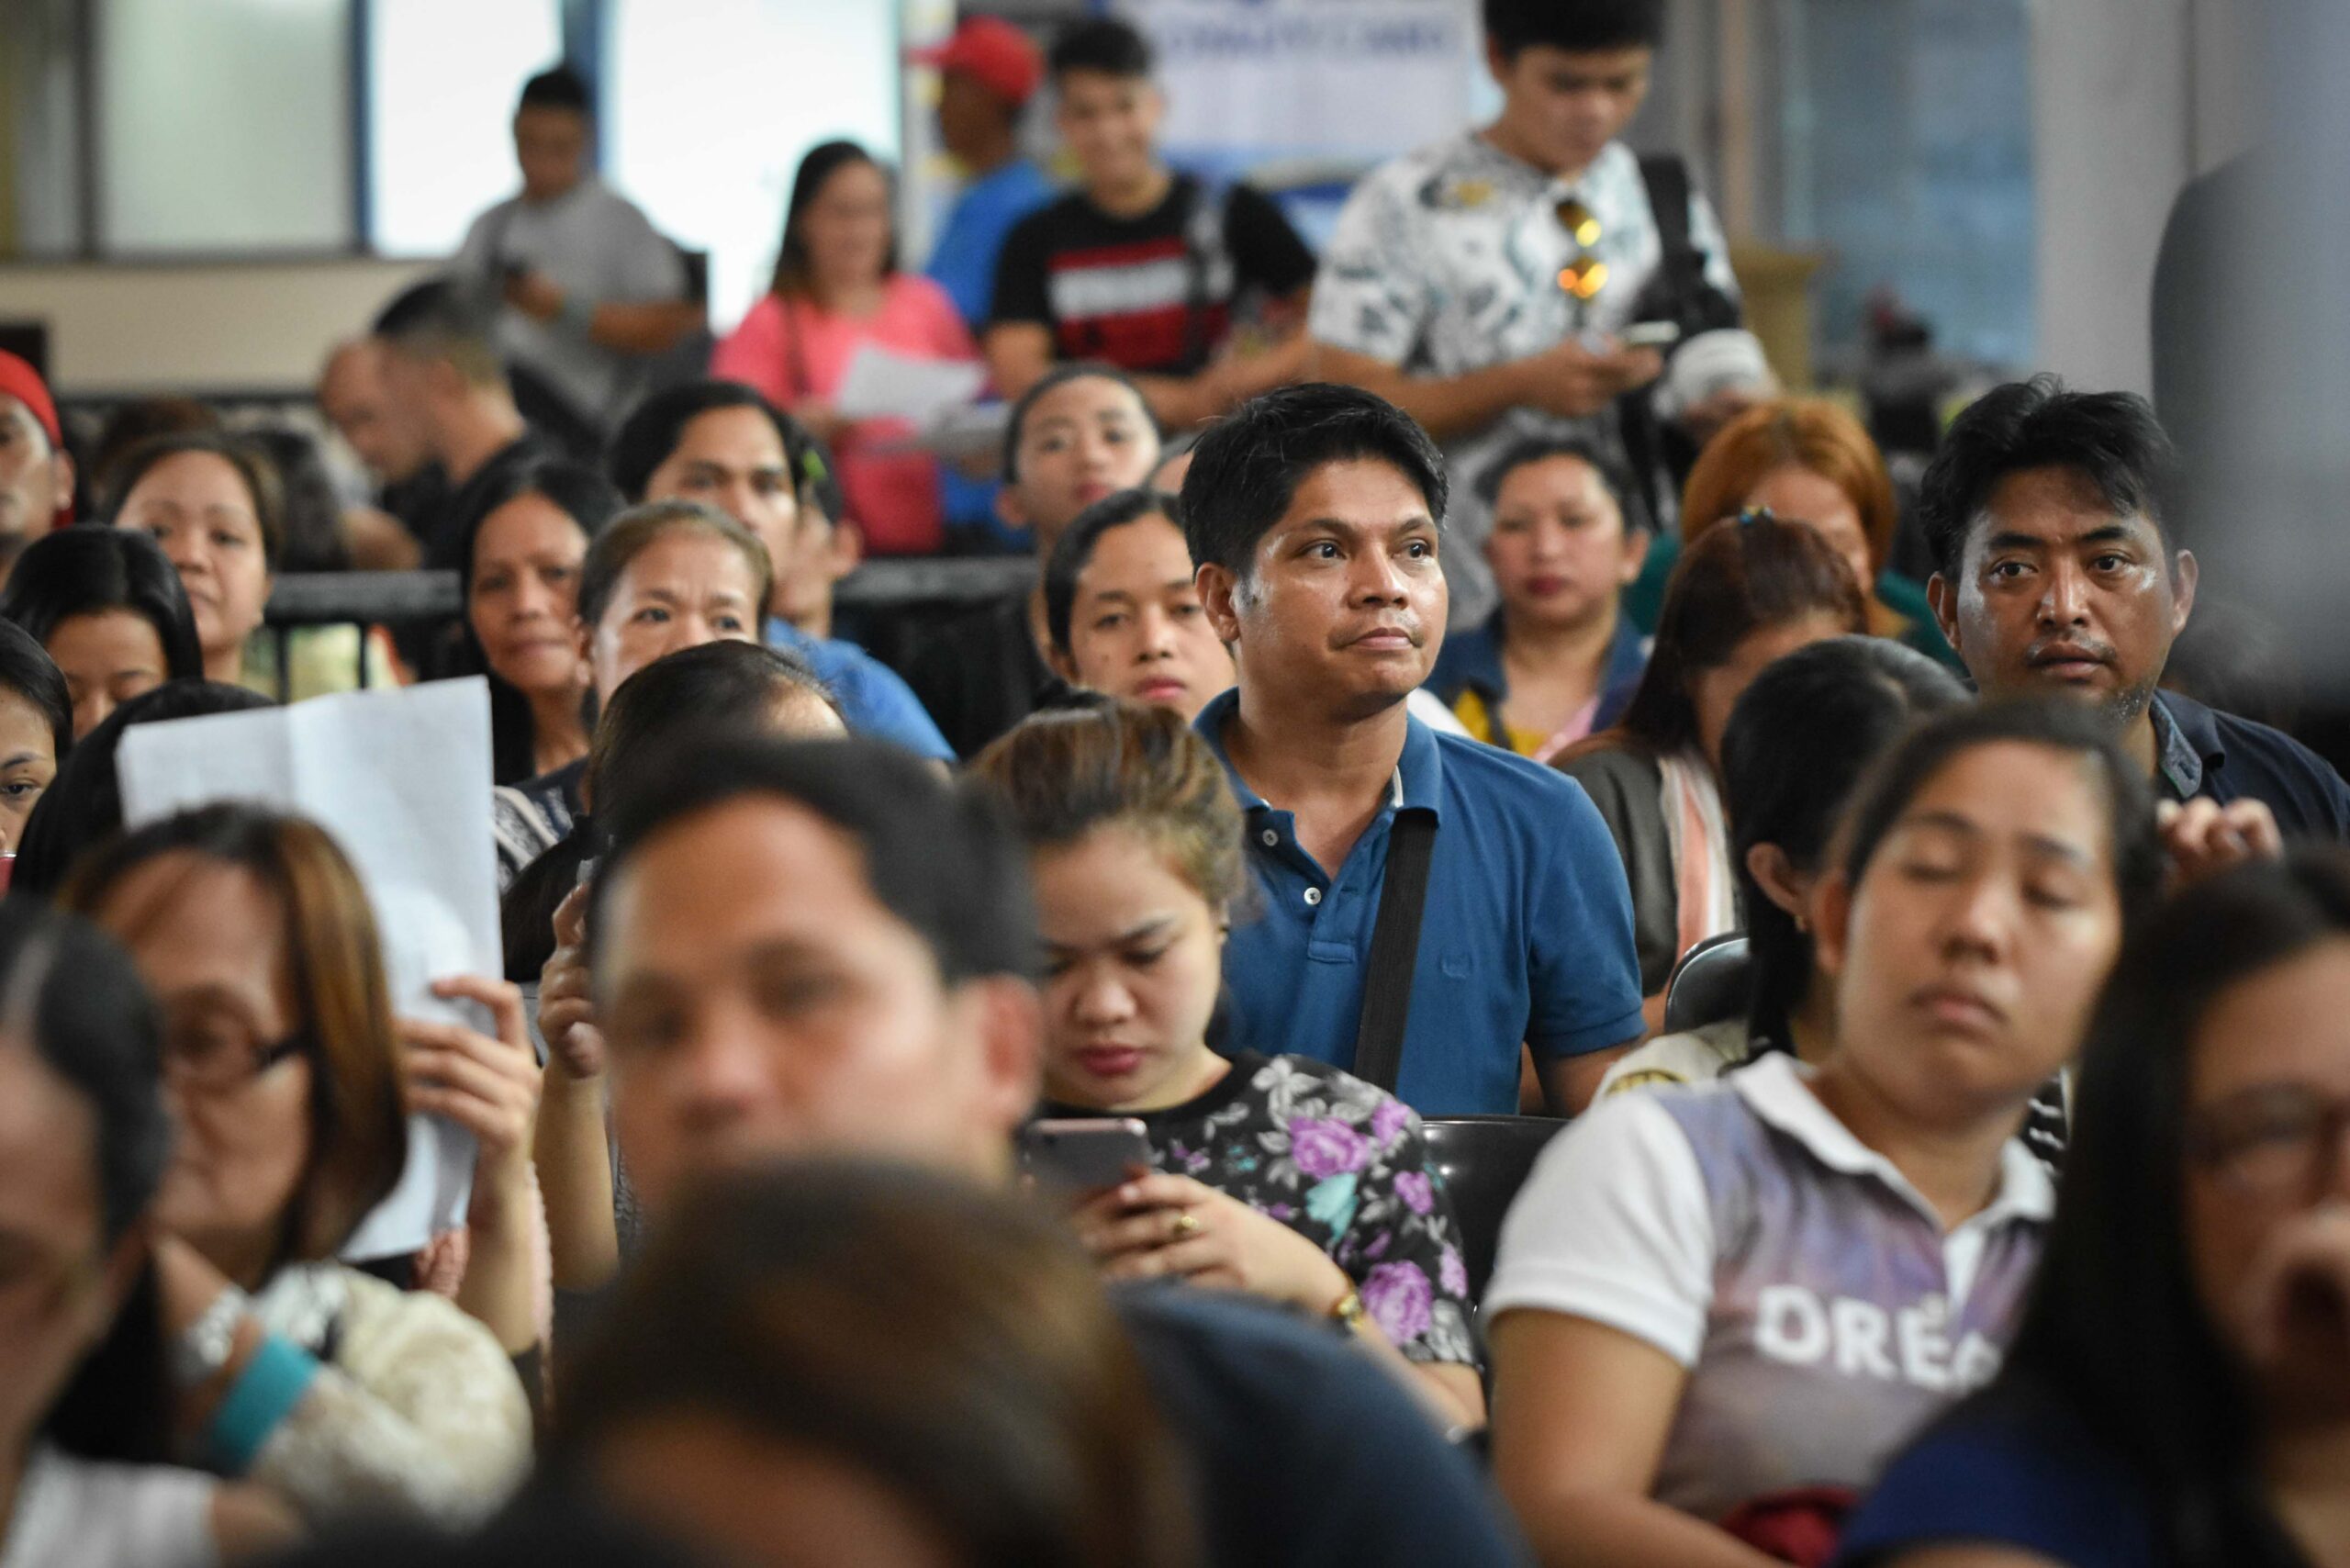 OFWs ‘stable’ after Saudi oil attacks – Bello